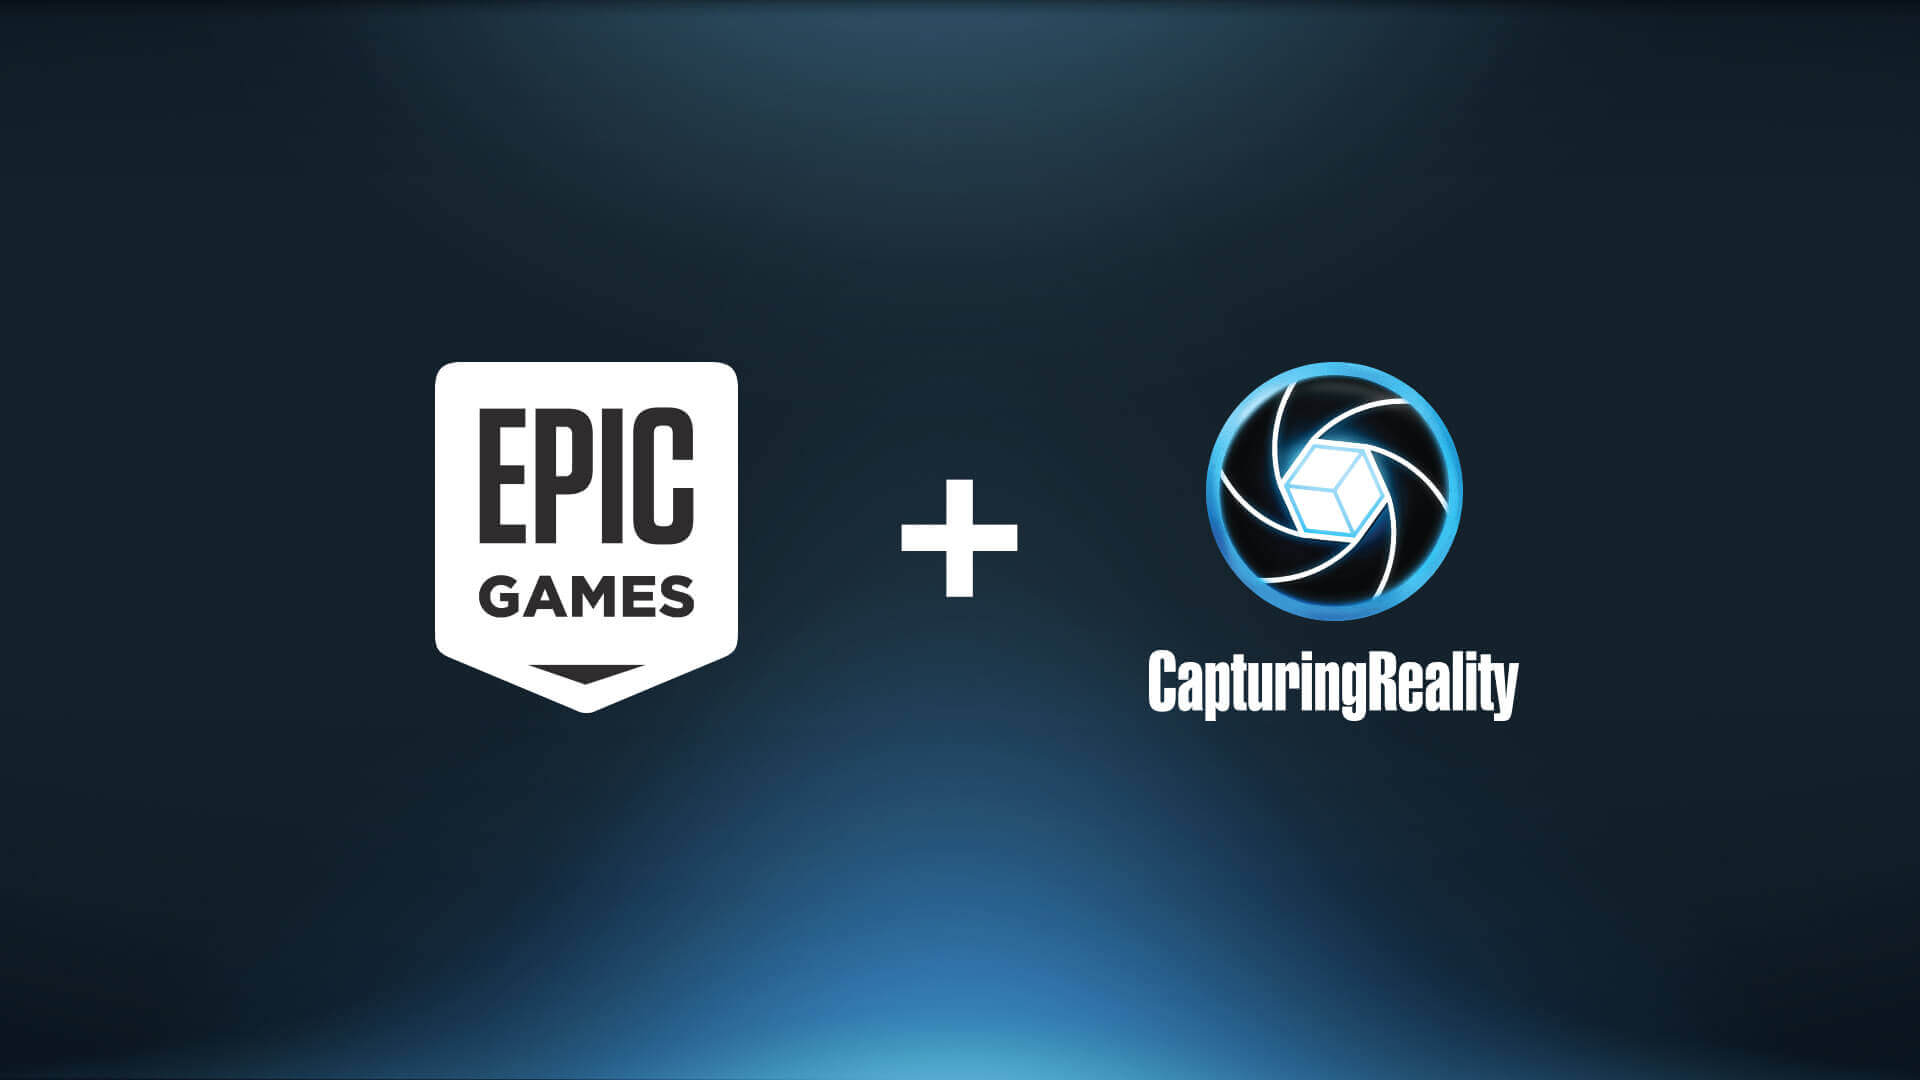 Epic Games & Capturing Reality